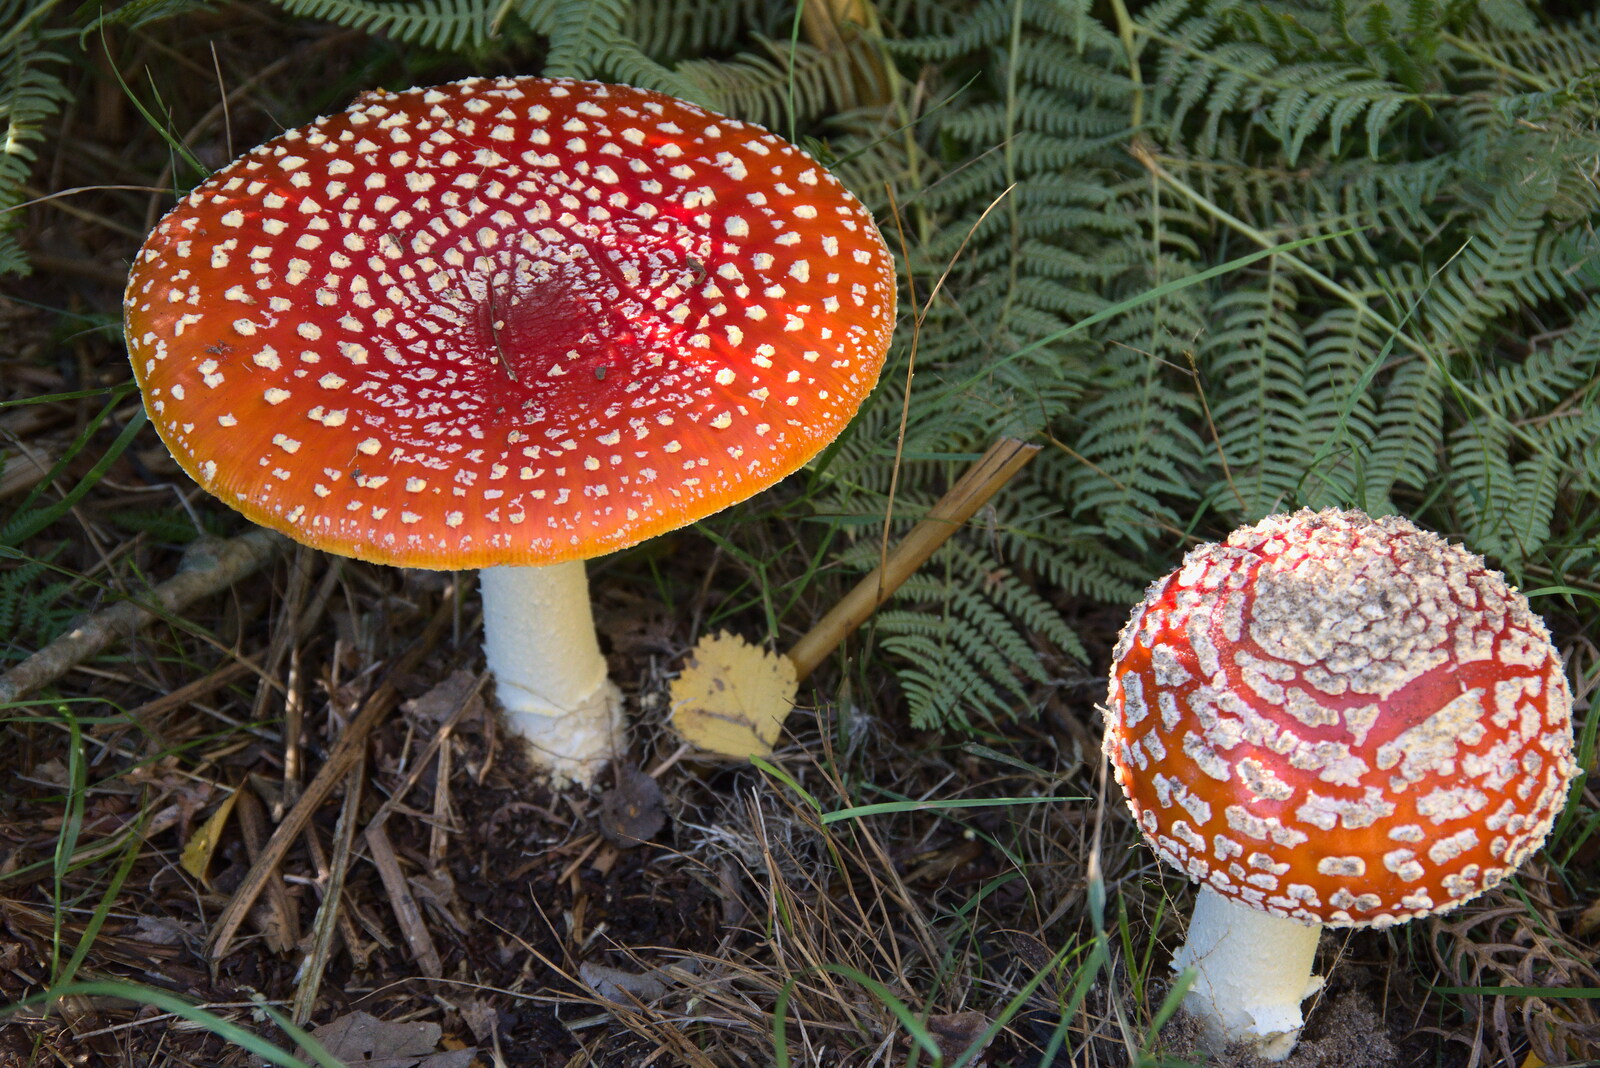 Harry's Scout Hike, Walberswick and Dunwich, Suffolk - 9th October 2022: A pair of classic toadstools - Fly Agarics